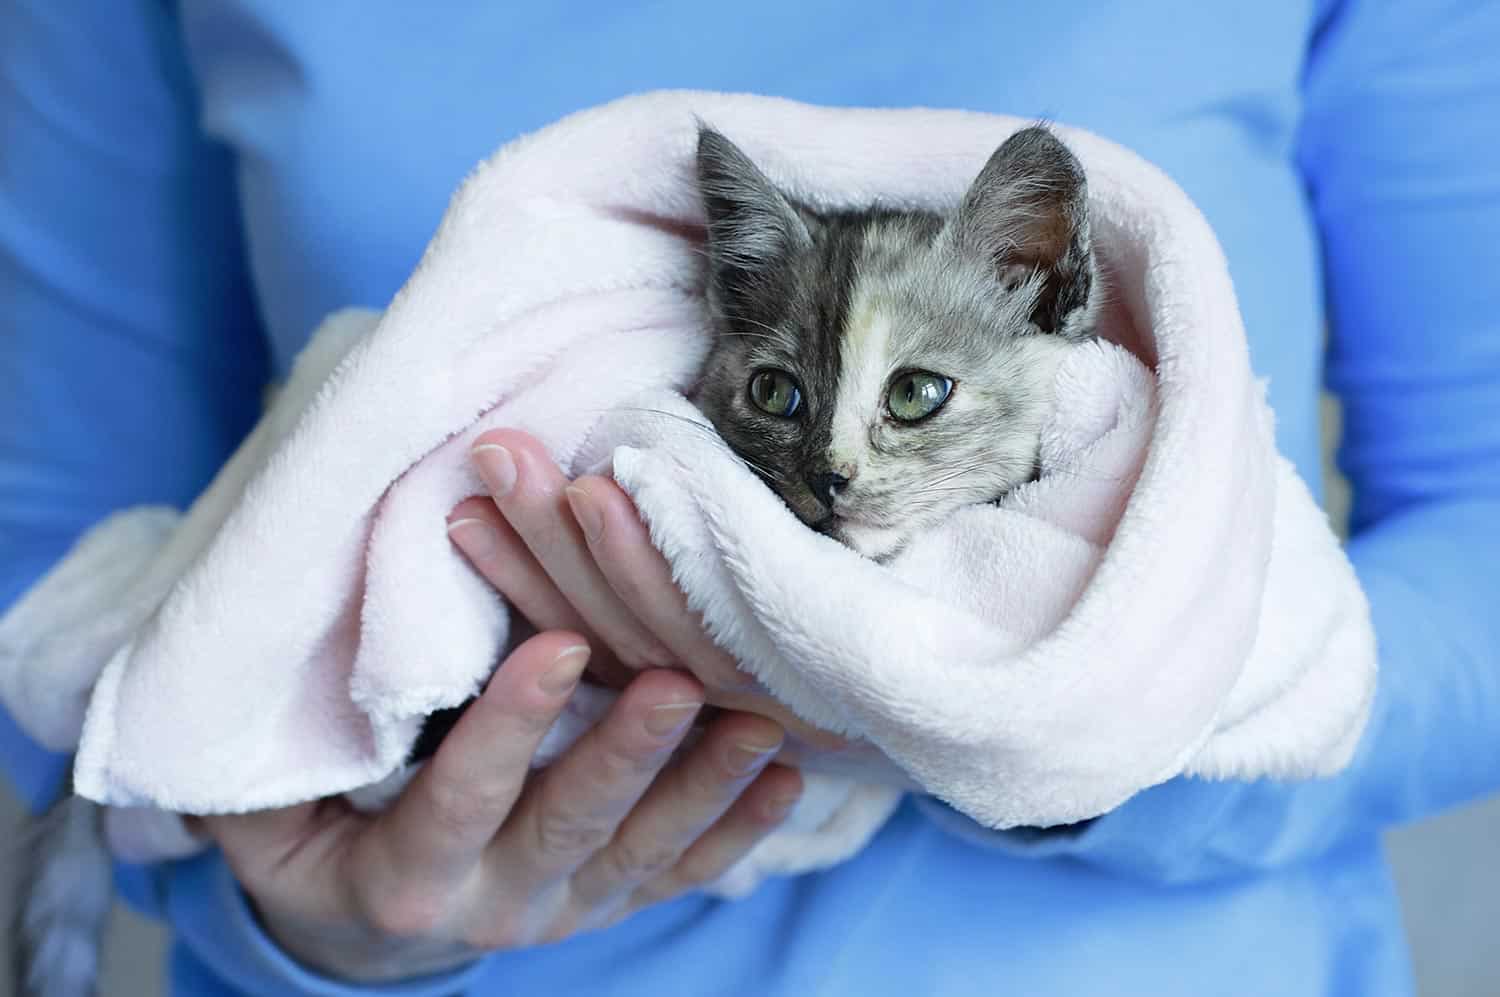 Gray kitten wrapped in a towel on the hands